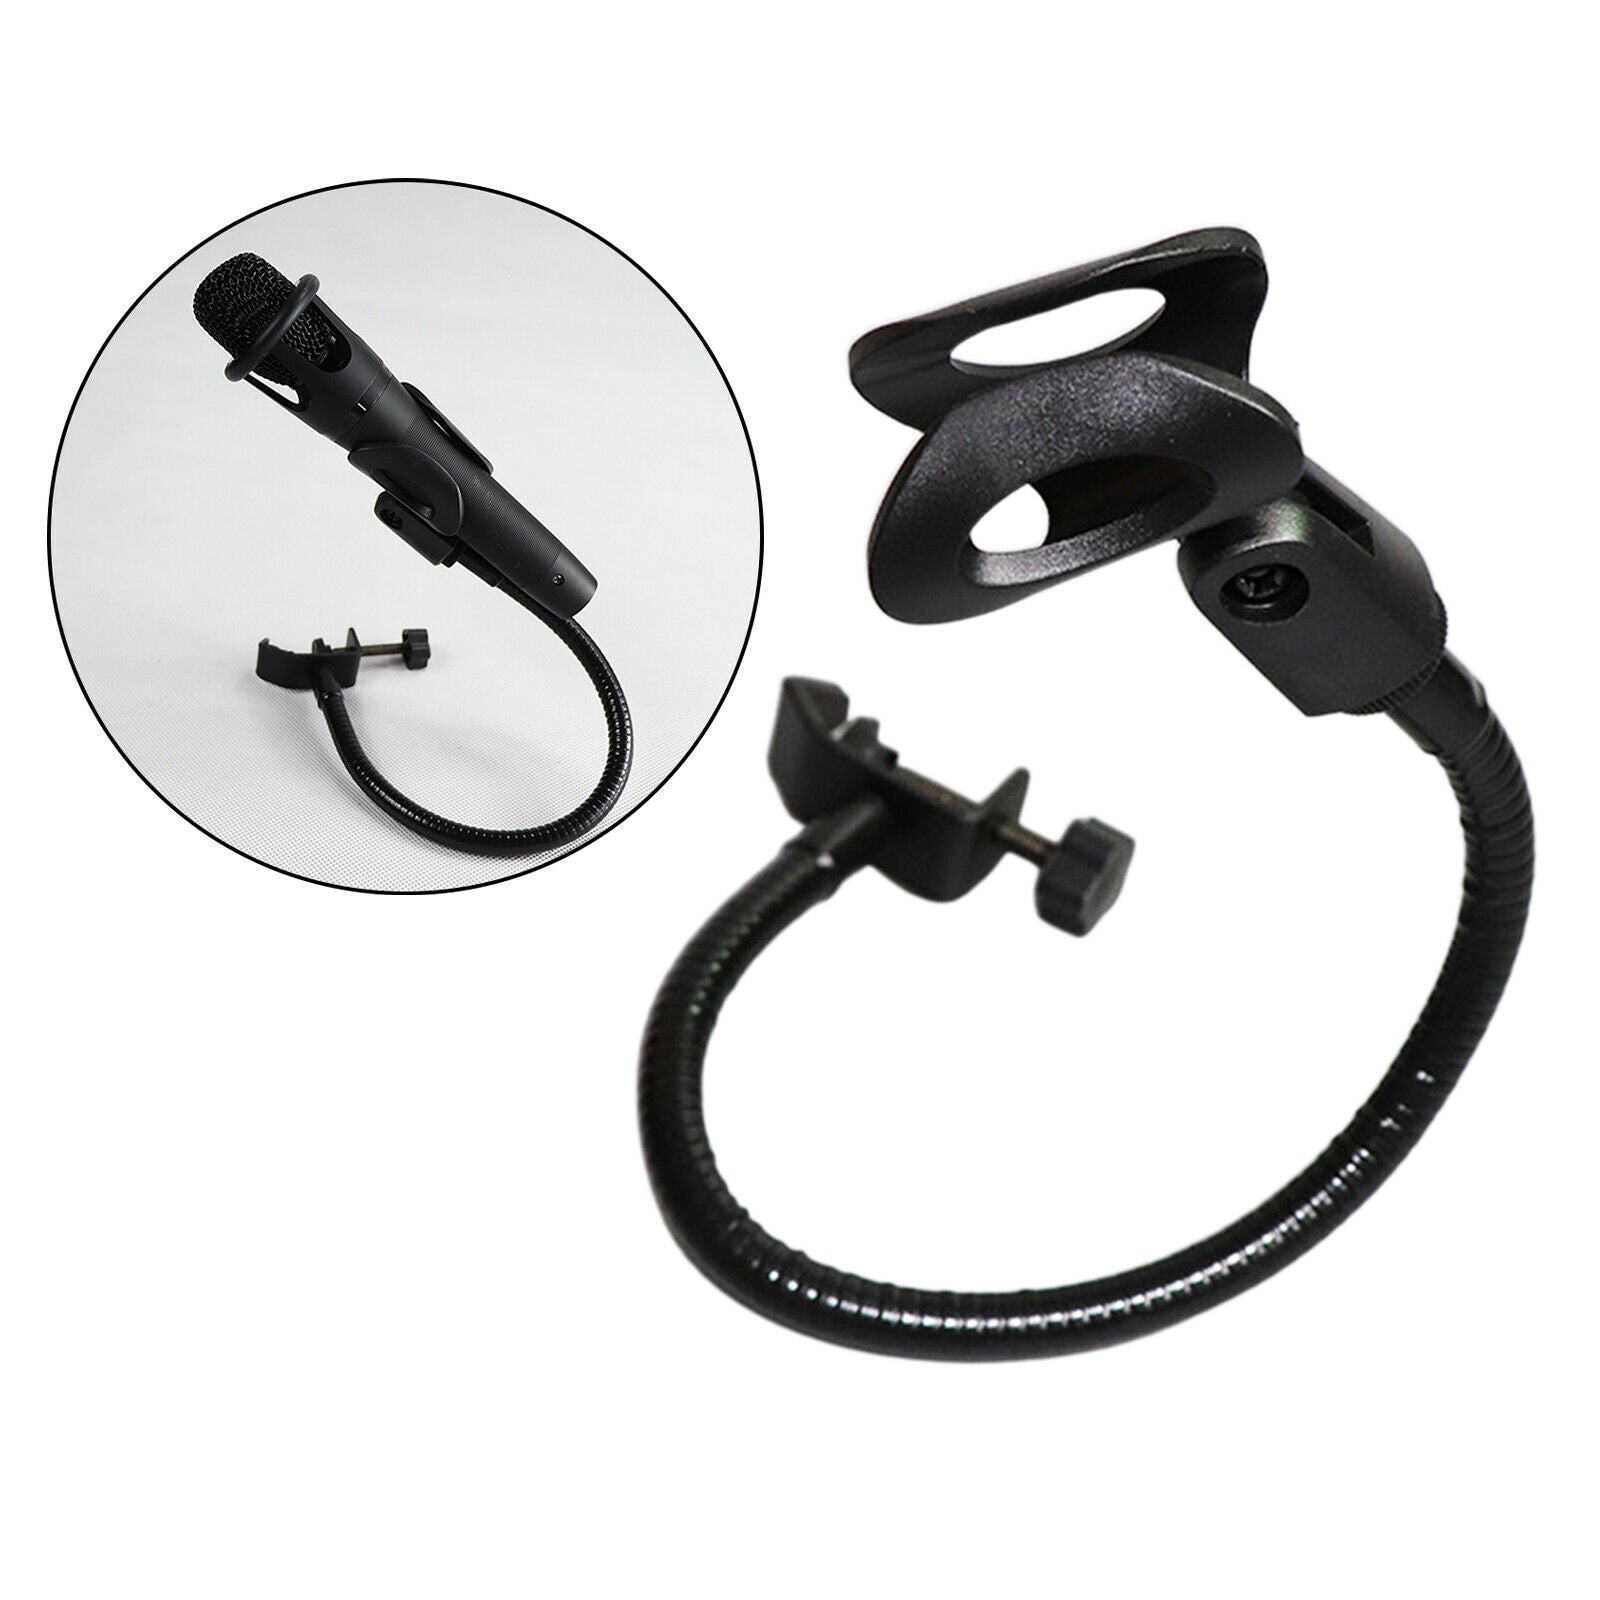 Gooseneck Microphone Stand with Desk Clamp for Radio Broadcasting Accessory